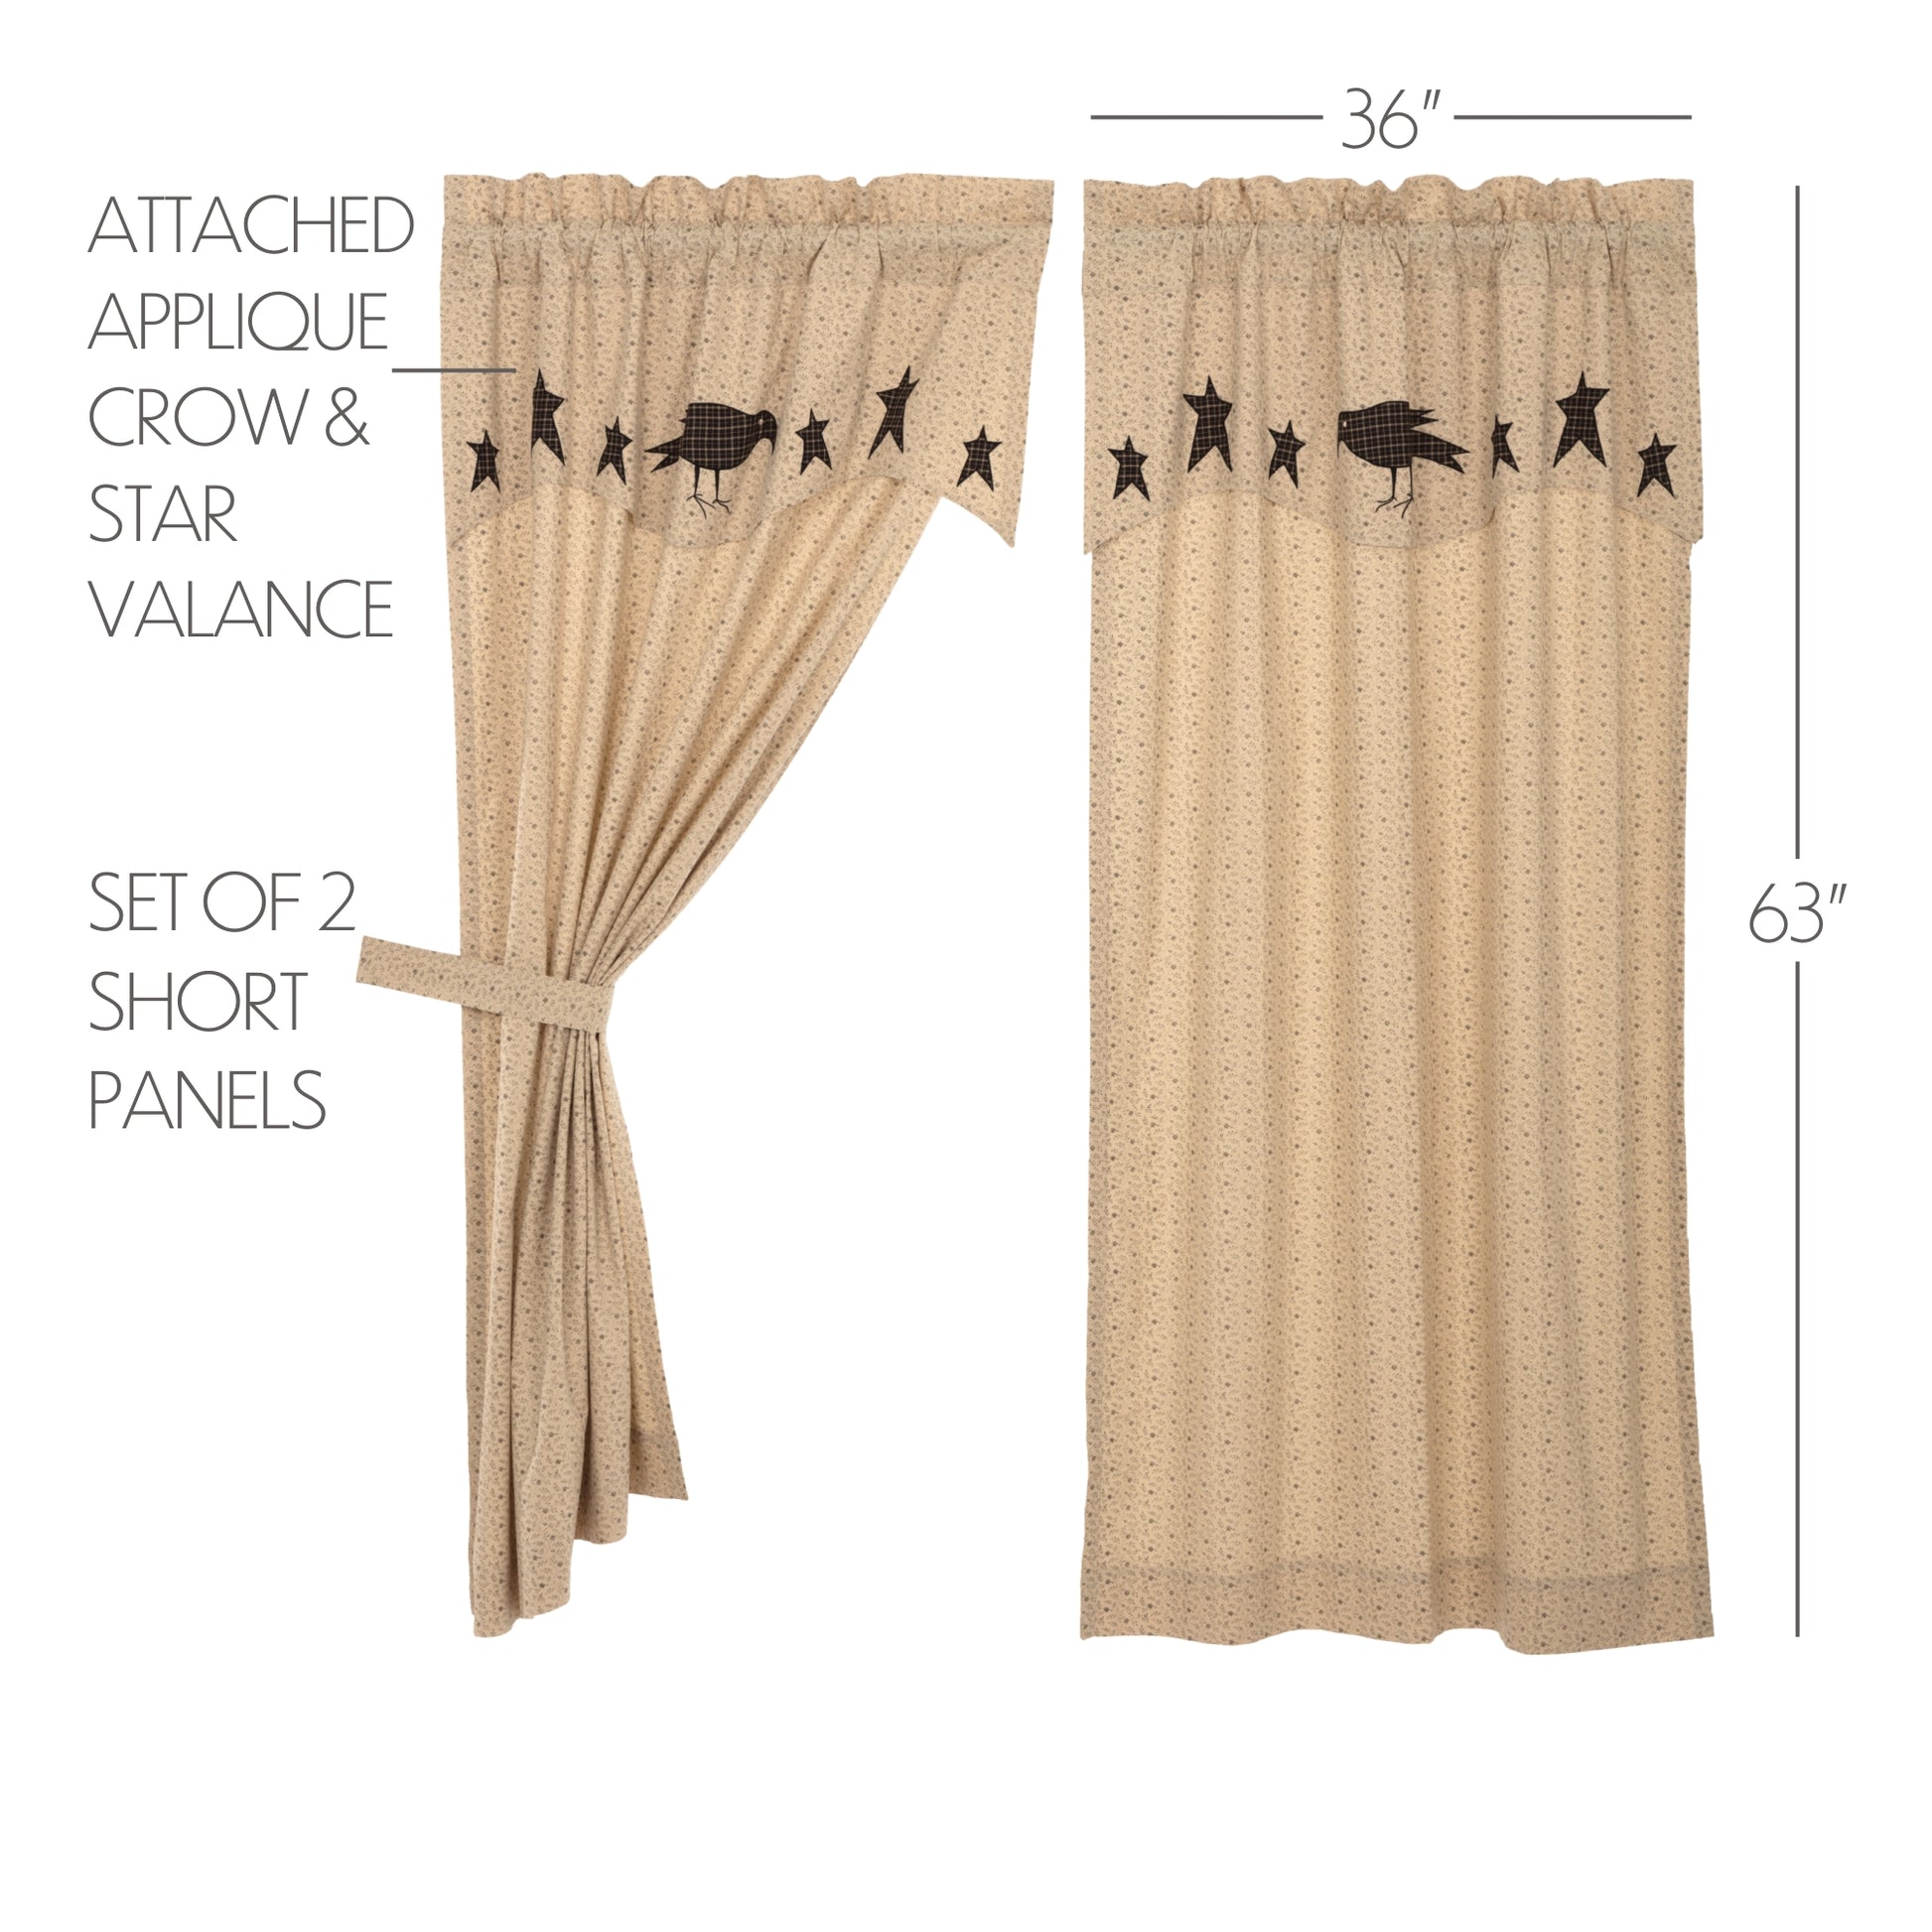 45792-Kettle-Grove-Short-Panel-with-Attached-Applique-Crow-and-Star-Valance-Set-of-2-63x36-image-1